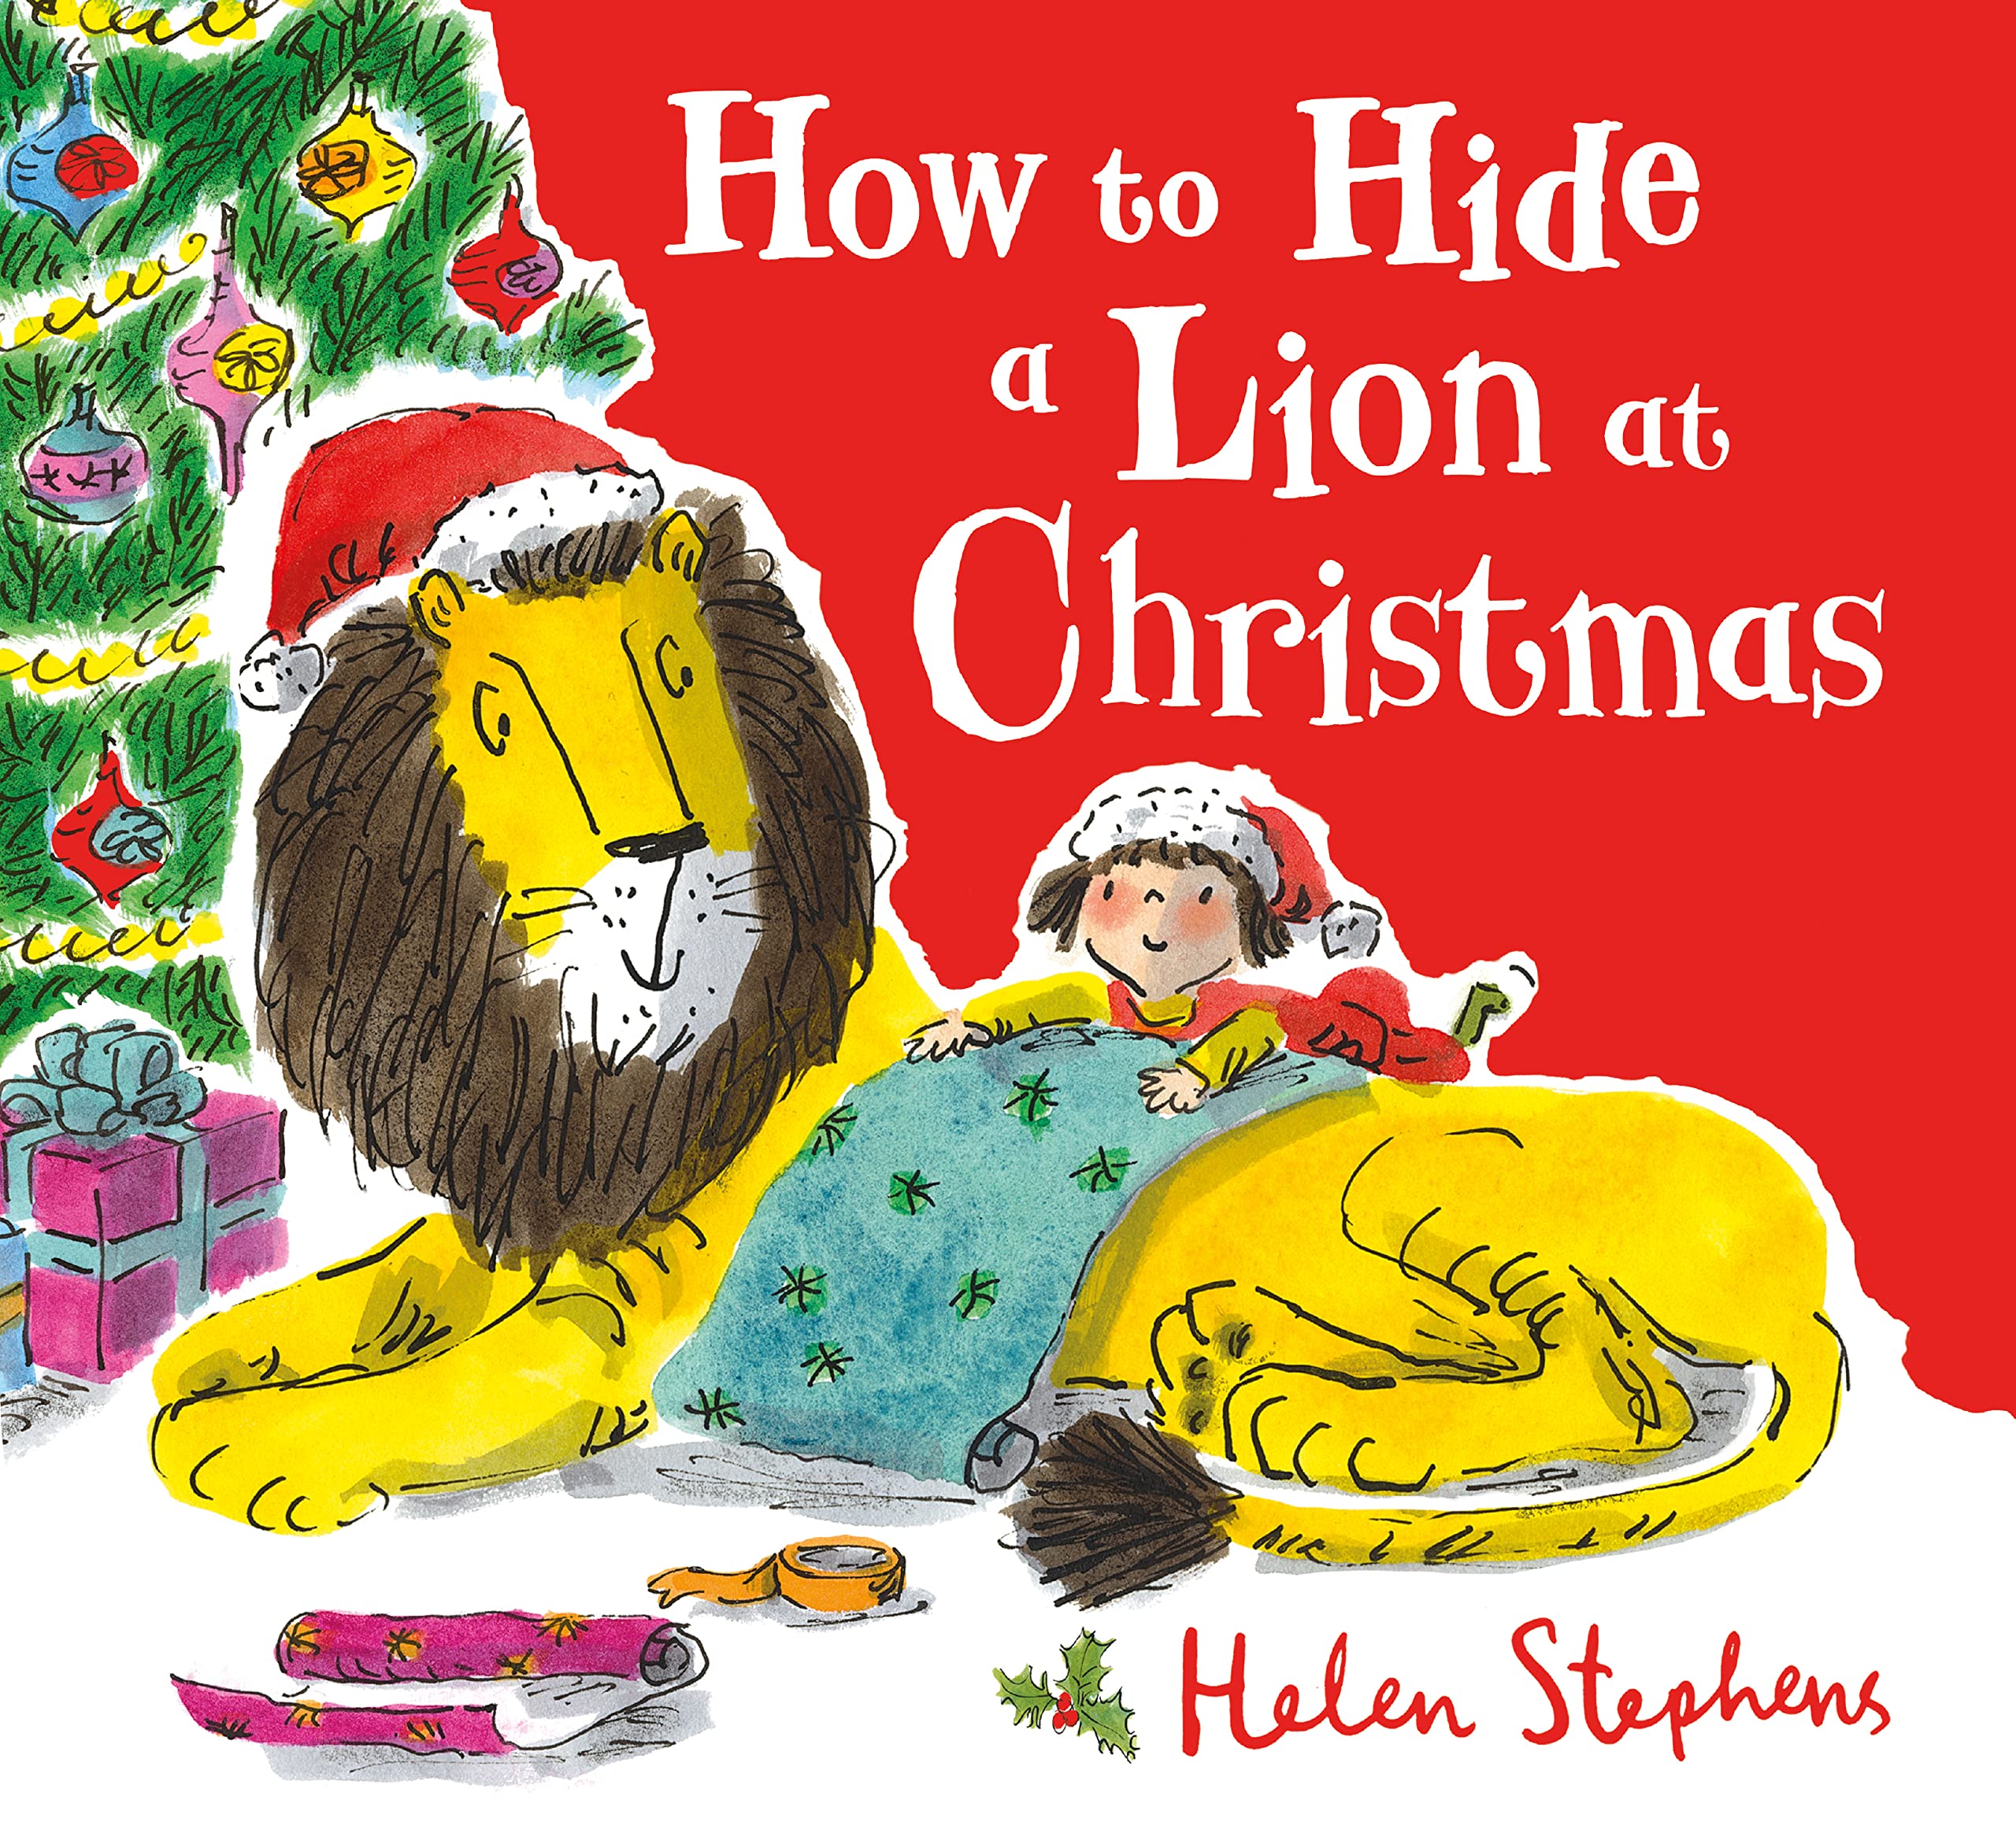 How to Hide a Lion at Christmas